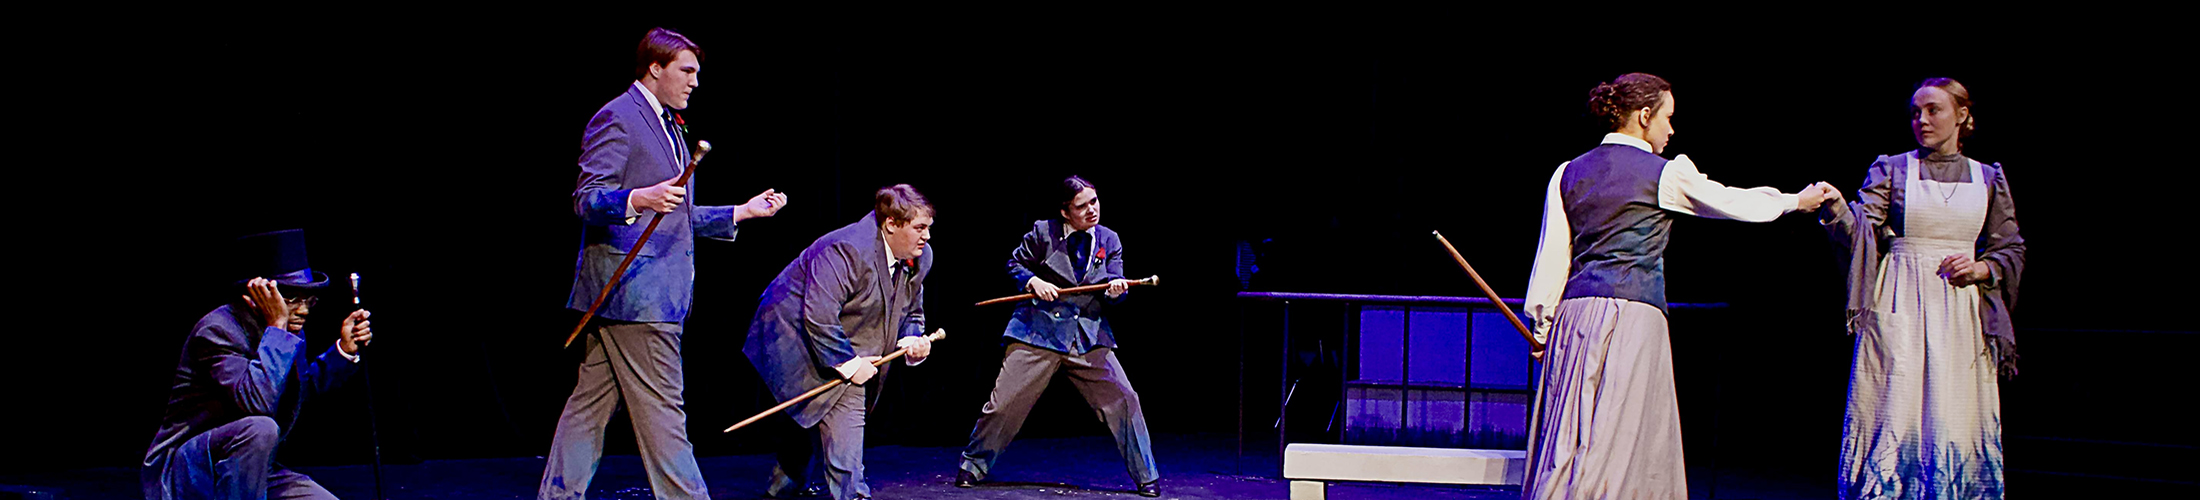 Students acting in a play on stage.